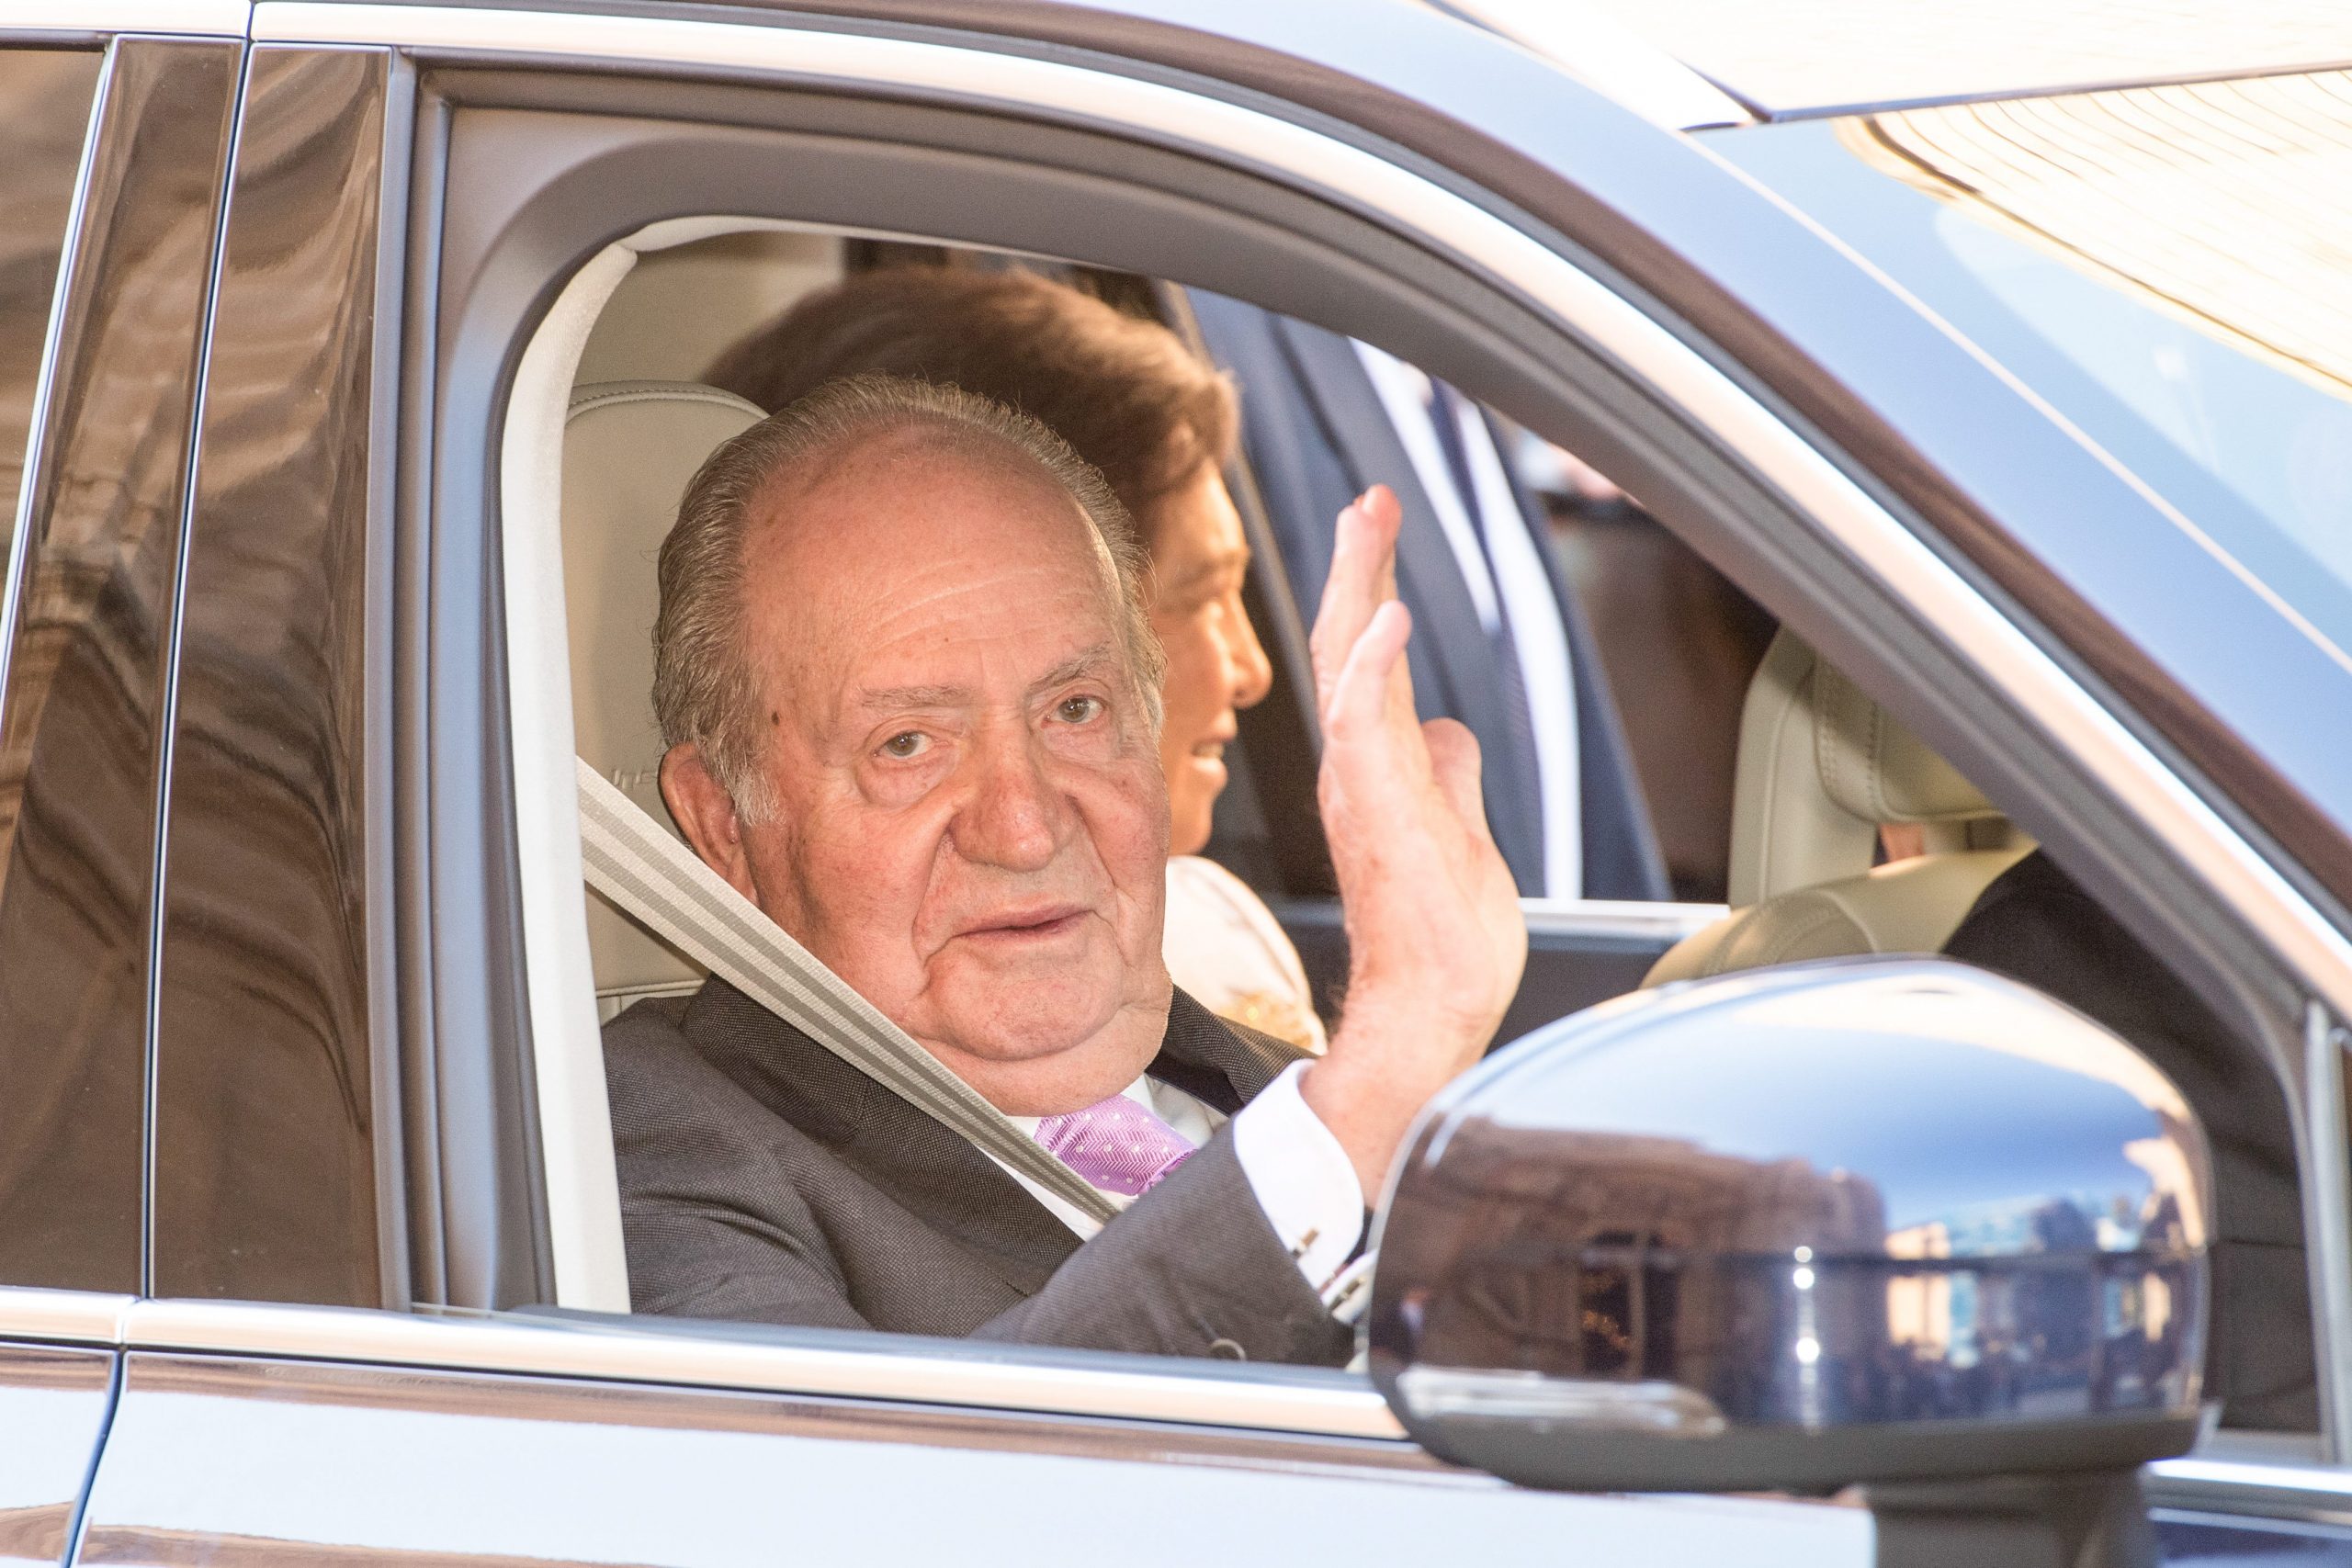 Spain's Emeritus King Juan Carlos to pay income tax in exiled home of Abu Dhabi